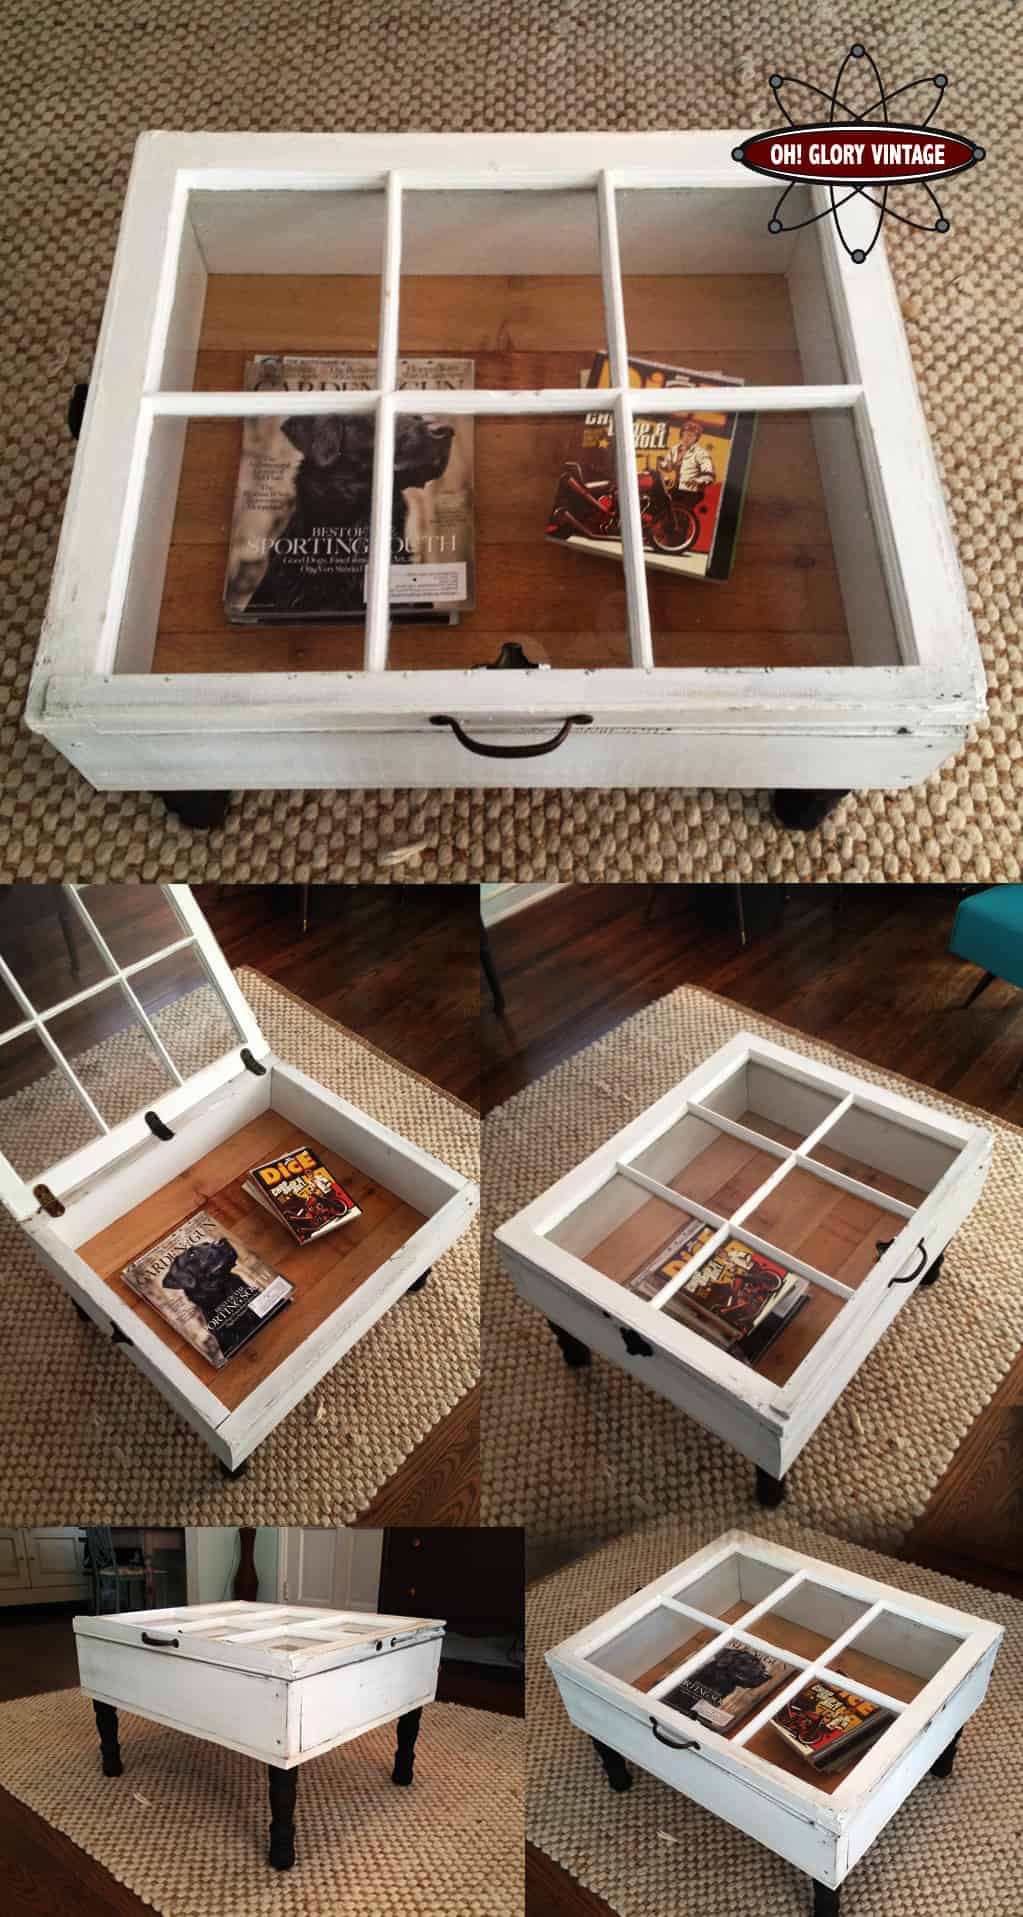 3. OLD WINDOWS TRANSFORMED INTO A BEAUTIFUL COFFEE TABLE